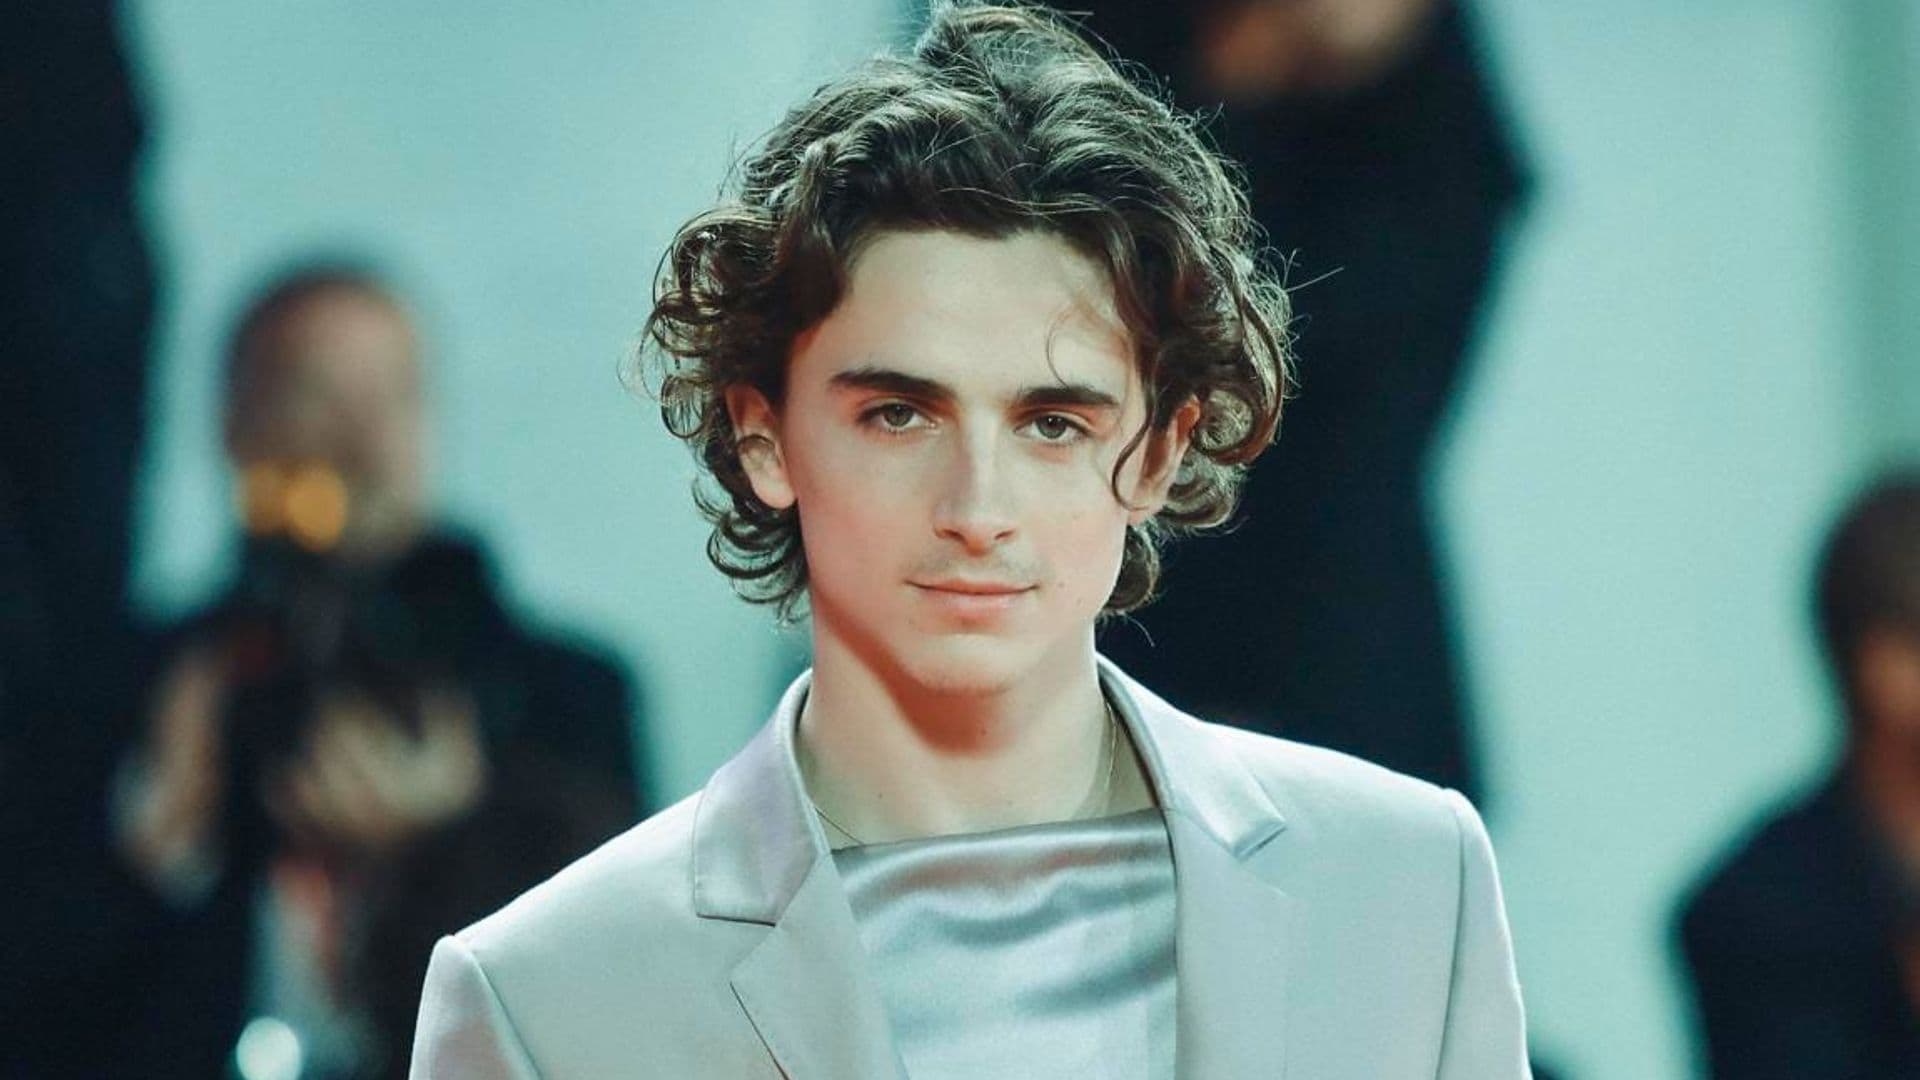 Timothée Chalamet opens up about “dark energy” at the Oscars